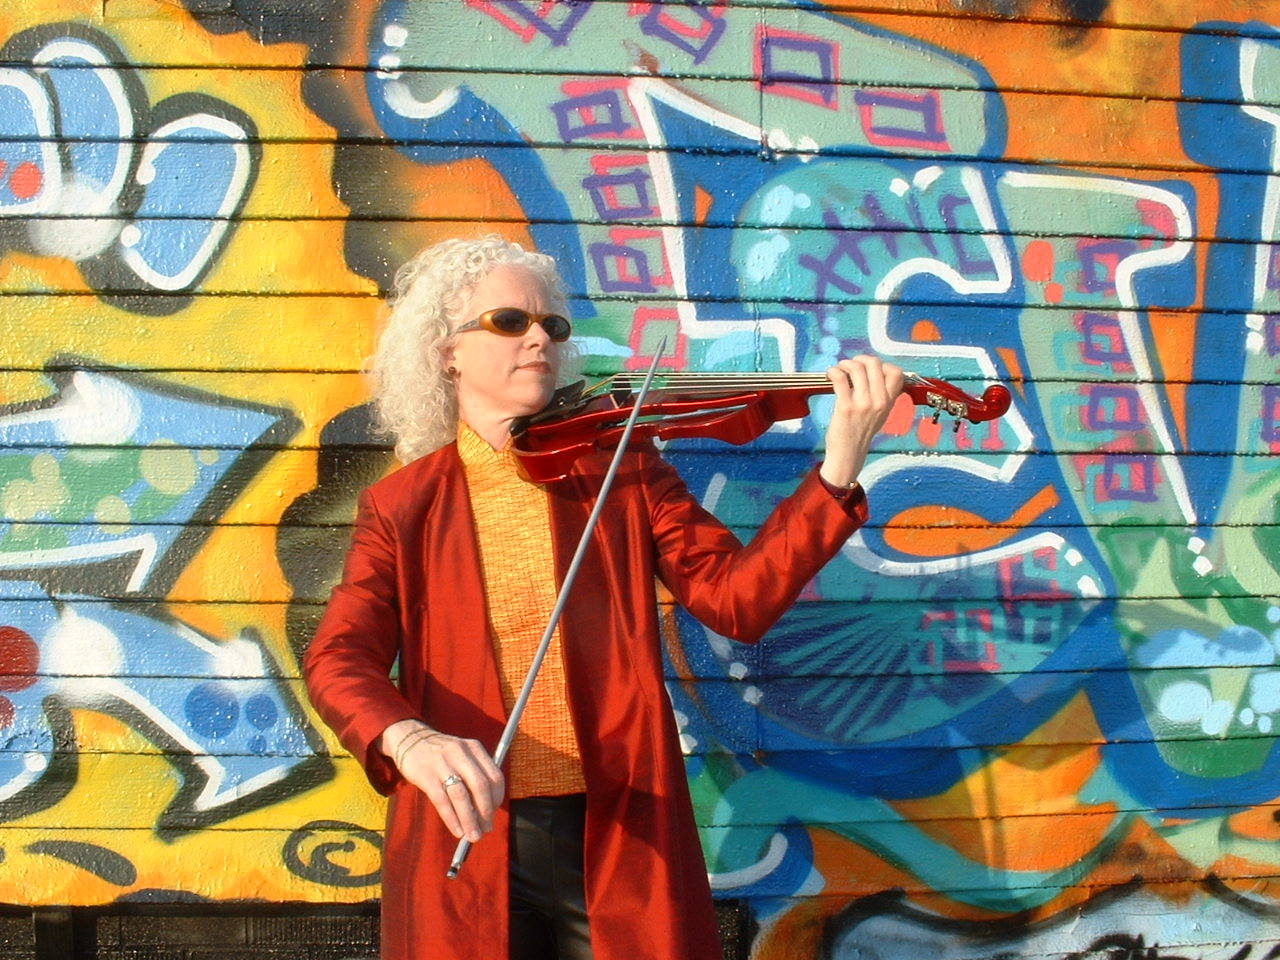 With her unusual instrument and use of digital effects, five-string violist Martha Mooke has found her musical voice. Courtesy.